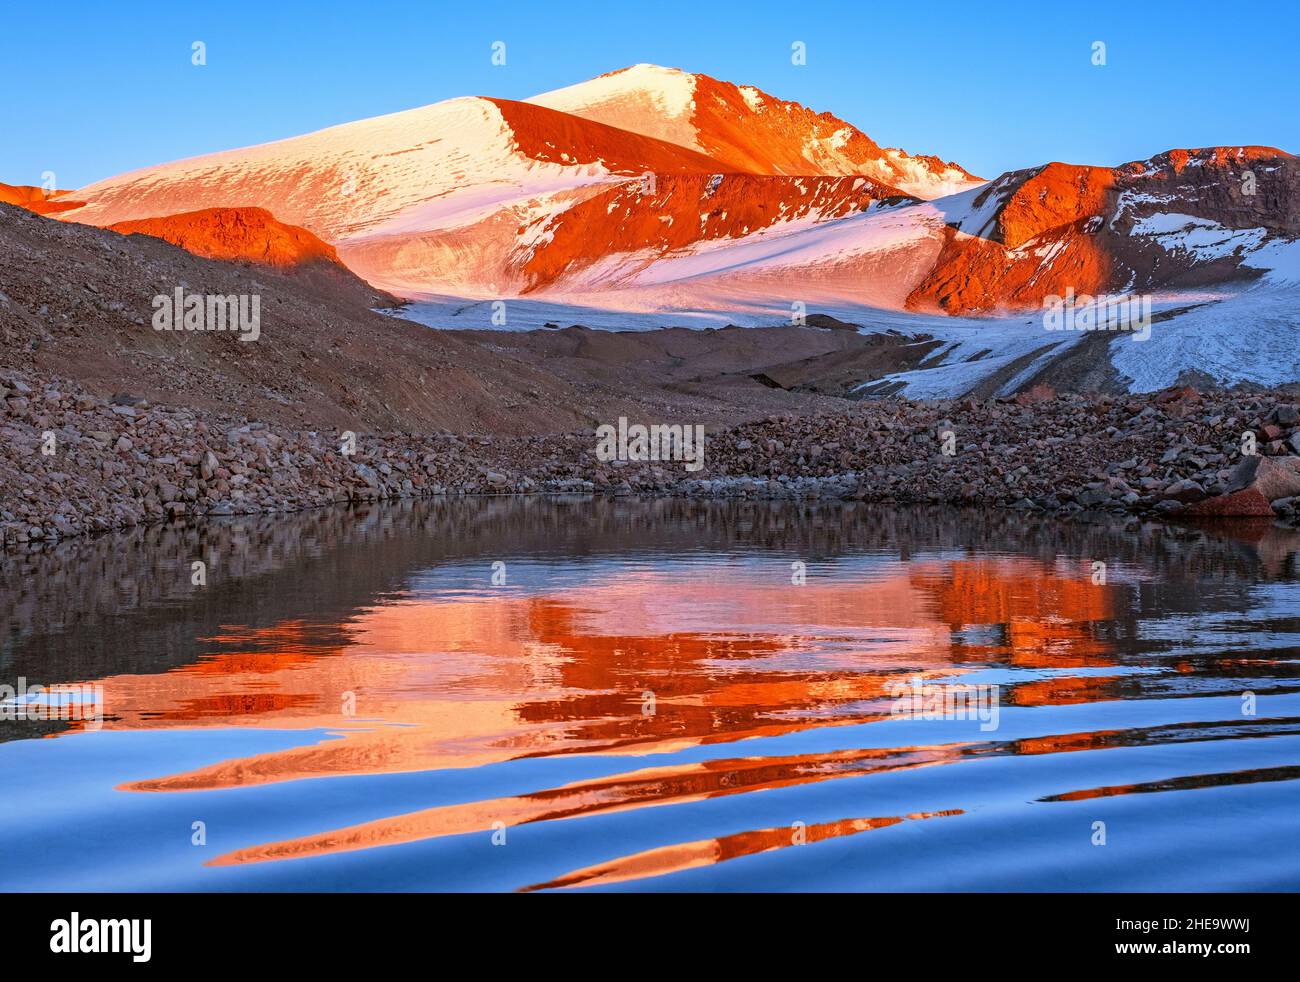 Wonderful mountain landscape; magical reflection of a mountain peak with glaciers in a moraine lake at sunset Stock Photo